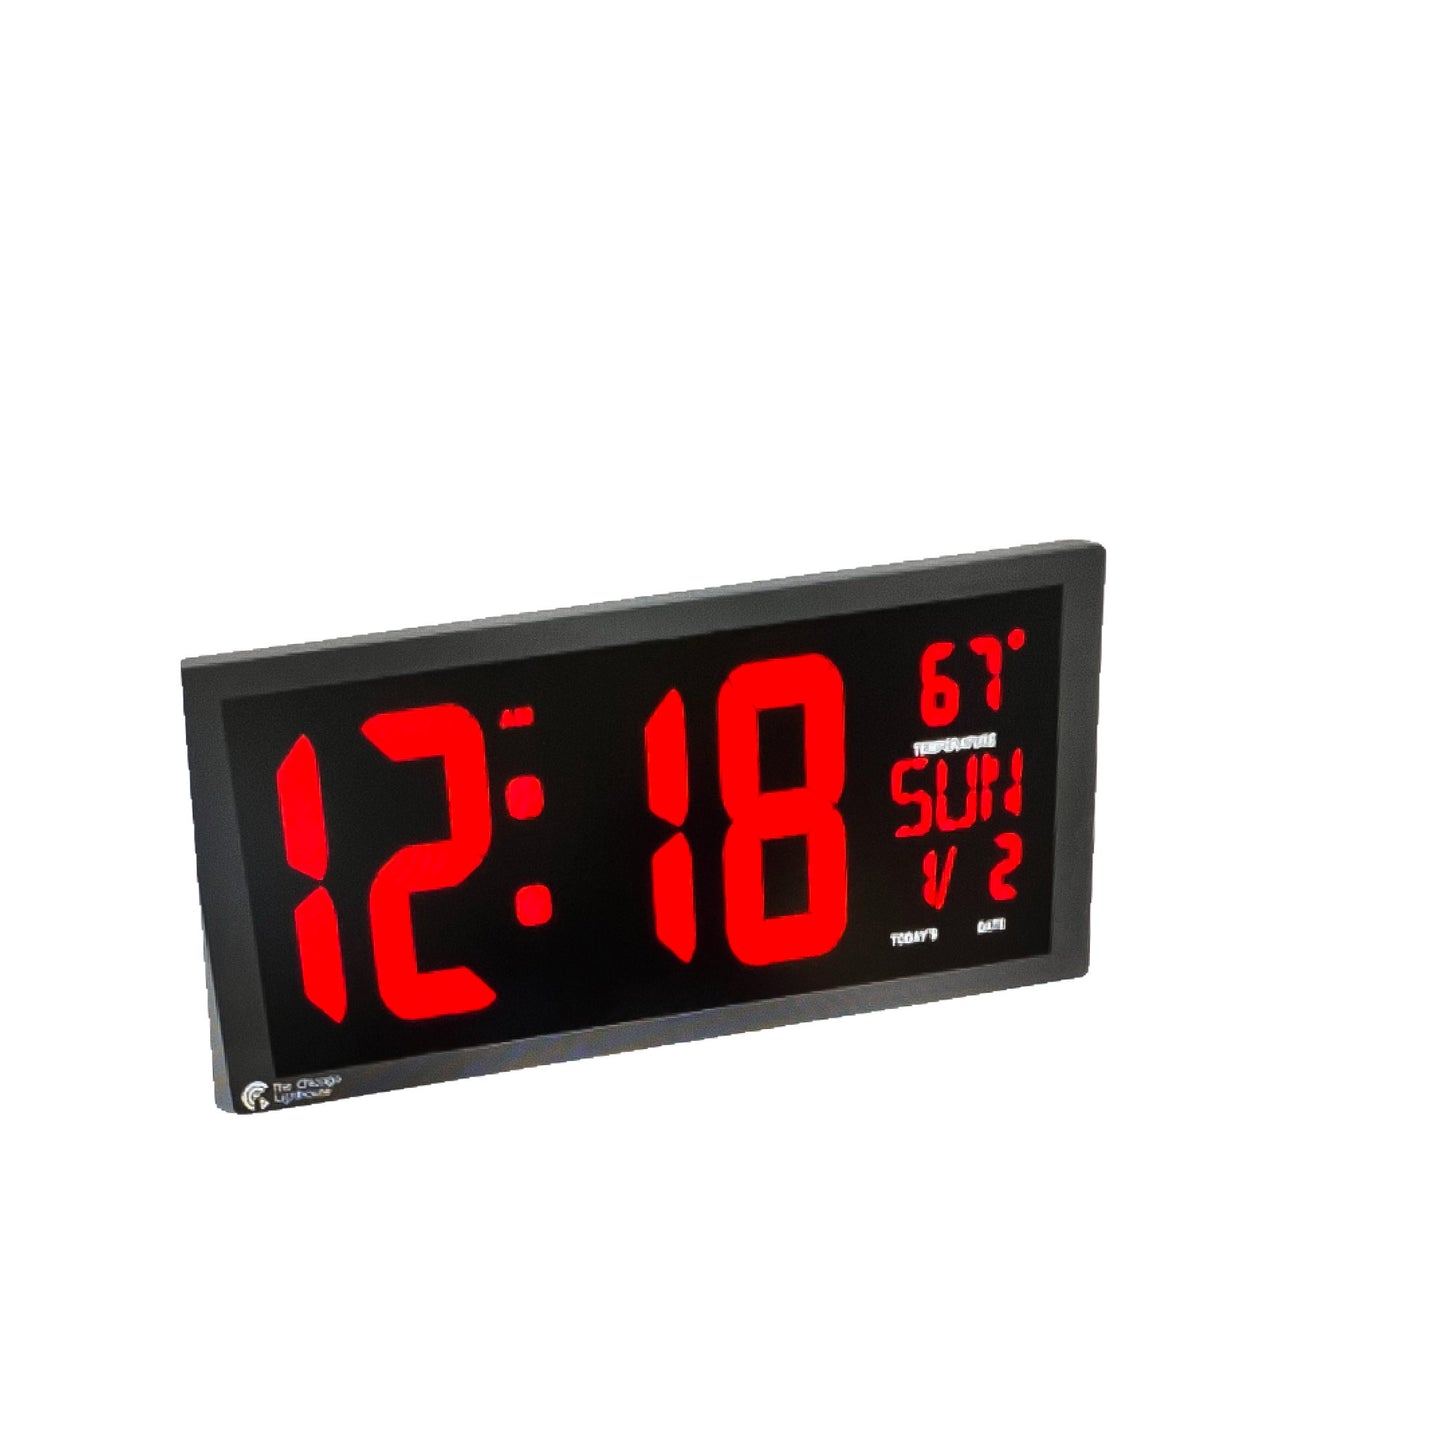 The14.5” x 6” Digital LED Low Vision Wall Mount Clock was packaged and distributed in the USA by people who are legally blind. All proceeds benefit The Chicago Lighthouse, a social service organization providing services for people who are blind, visually impaired, disabled and Veterans. Whenever possible we select local suppliers providing meaningful employment here at home.